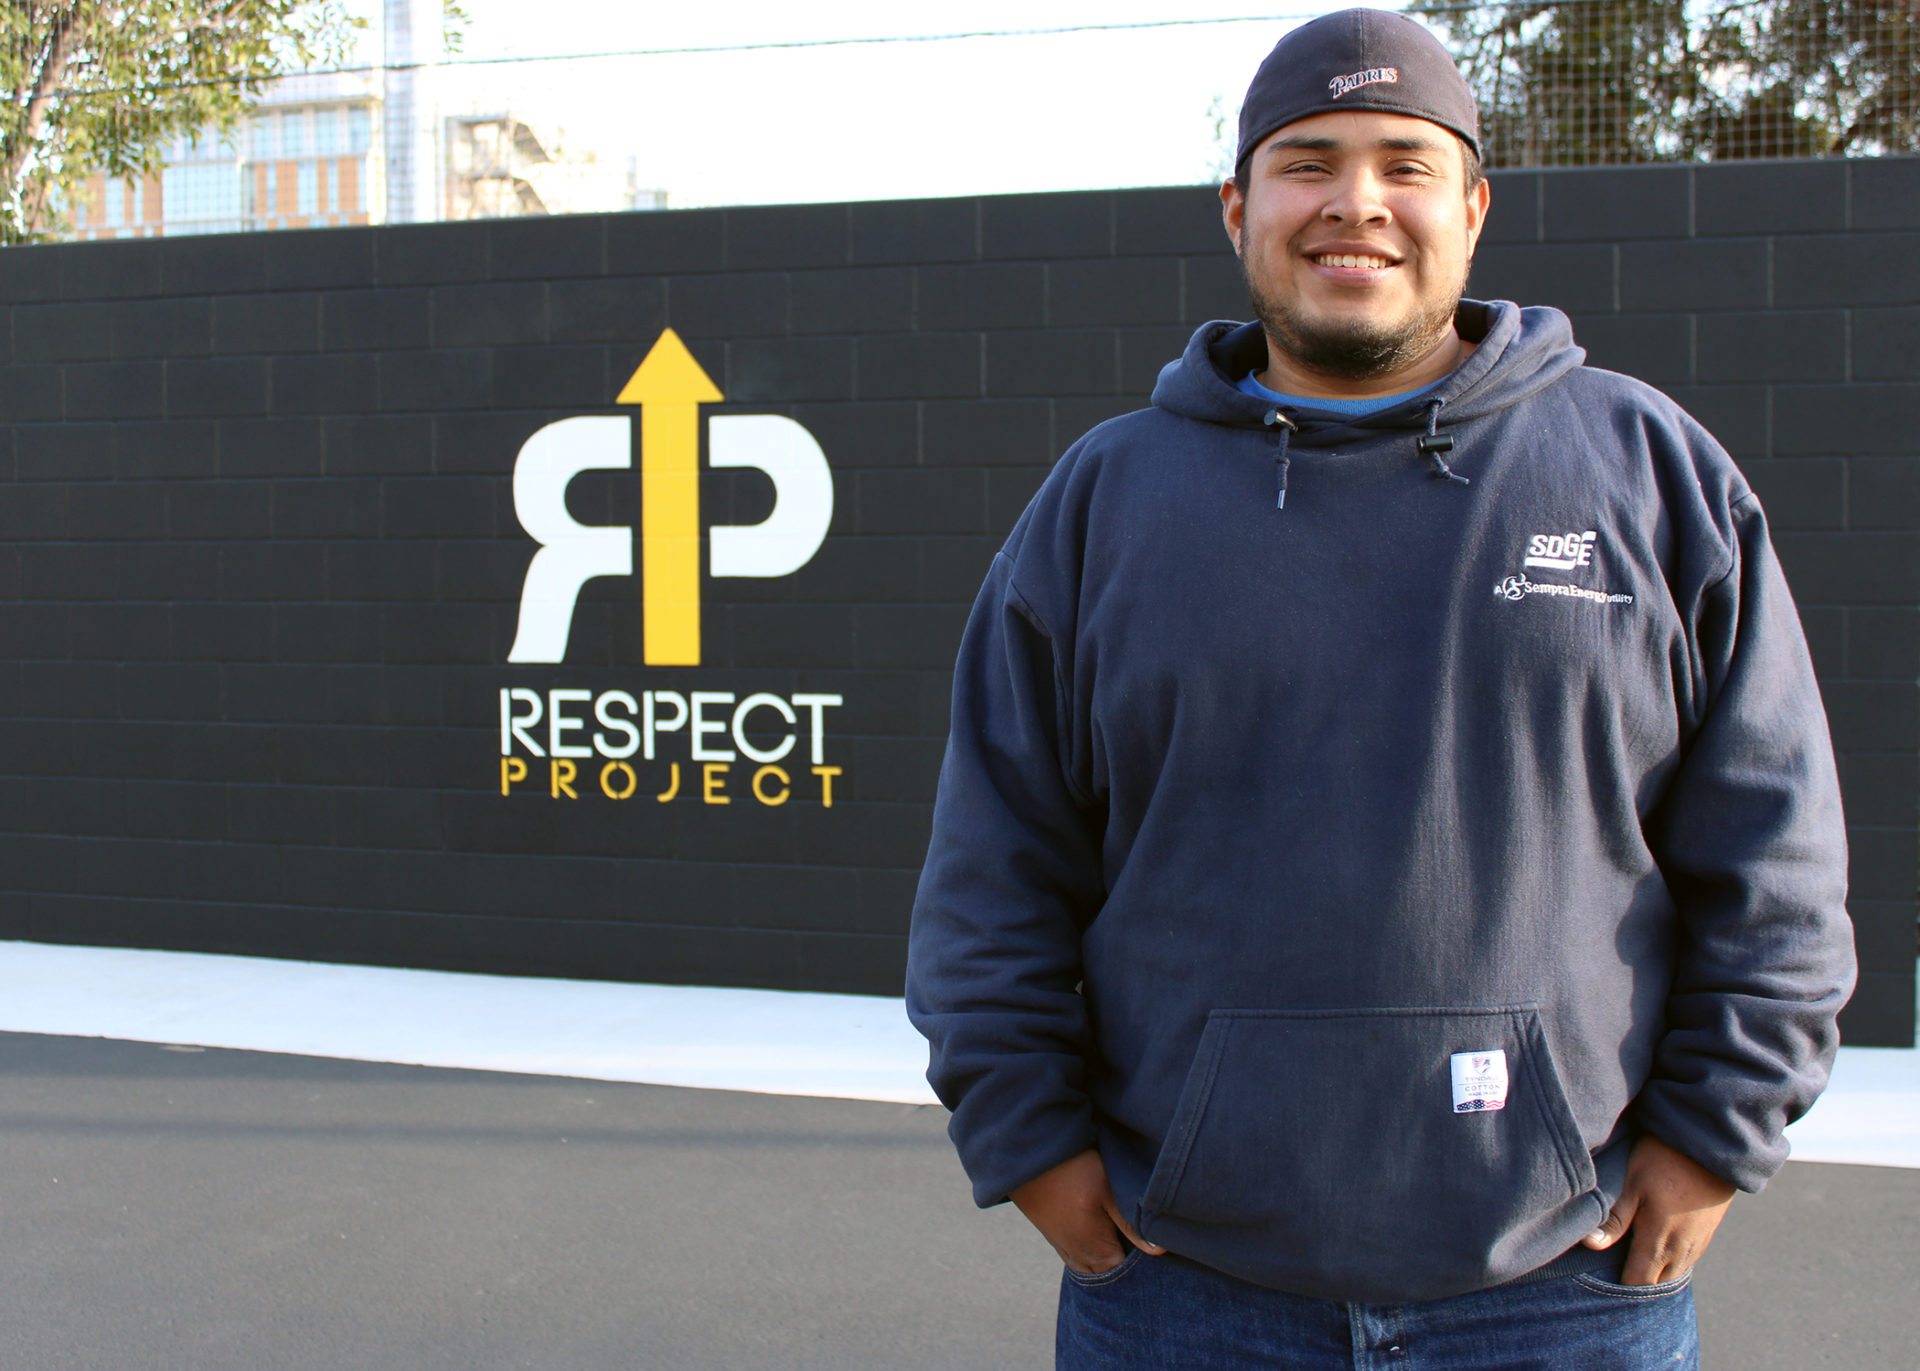 RESPECT Project graduate Antonio Ramirez stands in front of the RESPECT Project logo